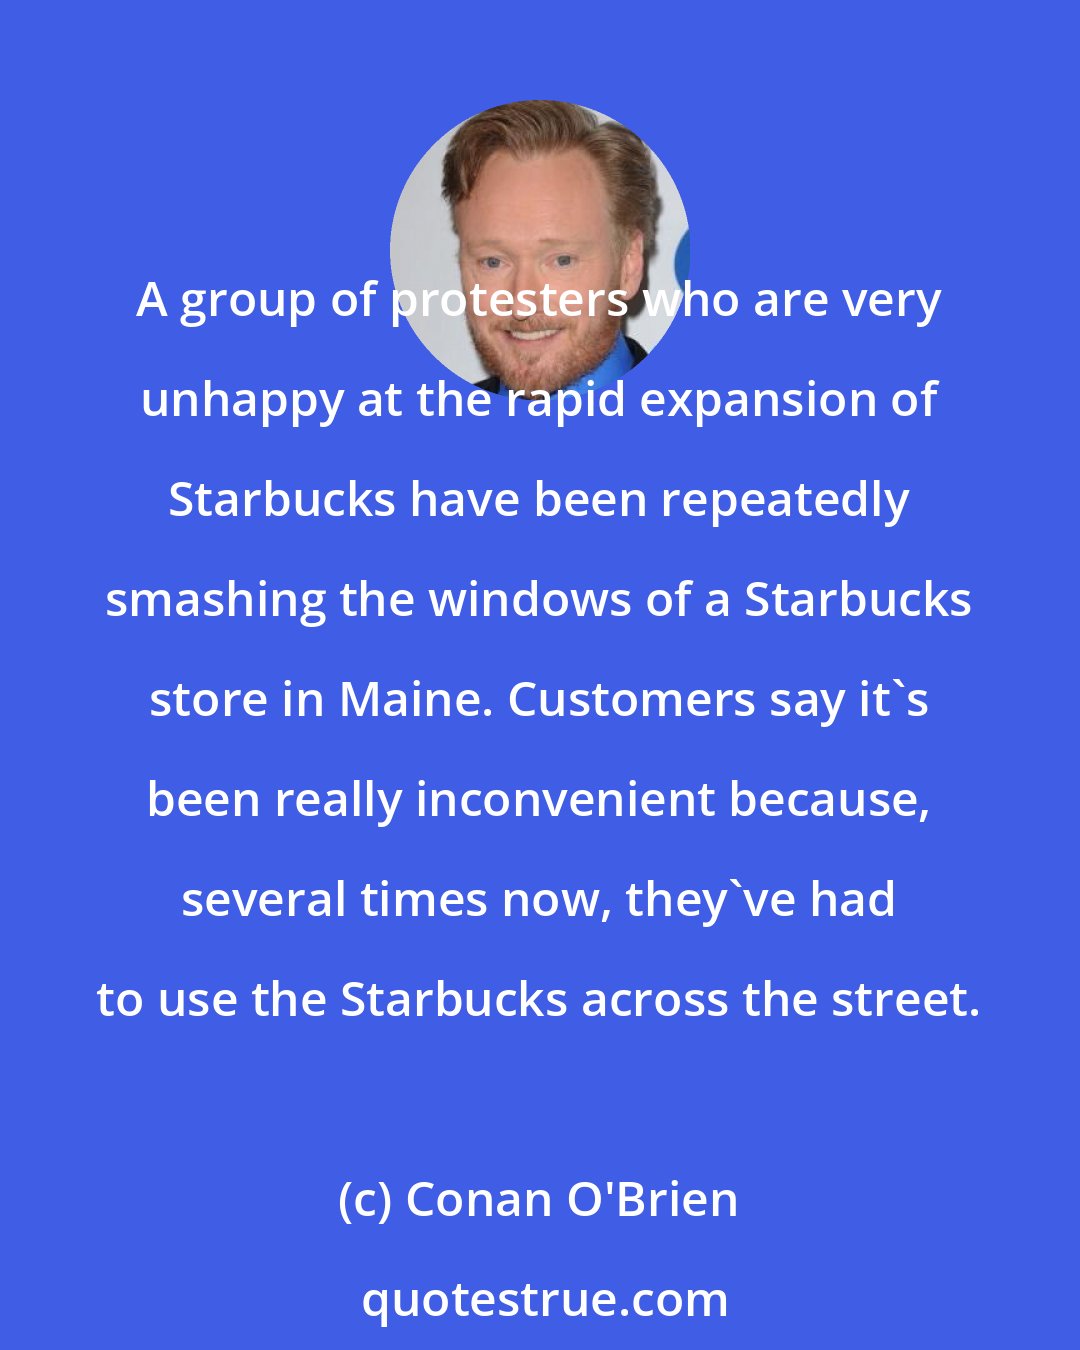 Conan O'Brien: A group of protesters who are very unhappy at the rapid expansion of Starbucks have been repeatedly smashing the windows of a Starbucks store in Maine. Customers say it's been really inconvenient because, several times now, they've had to use the Starbucks across the street.